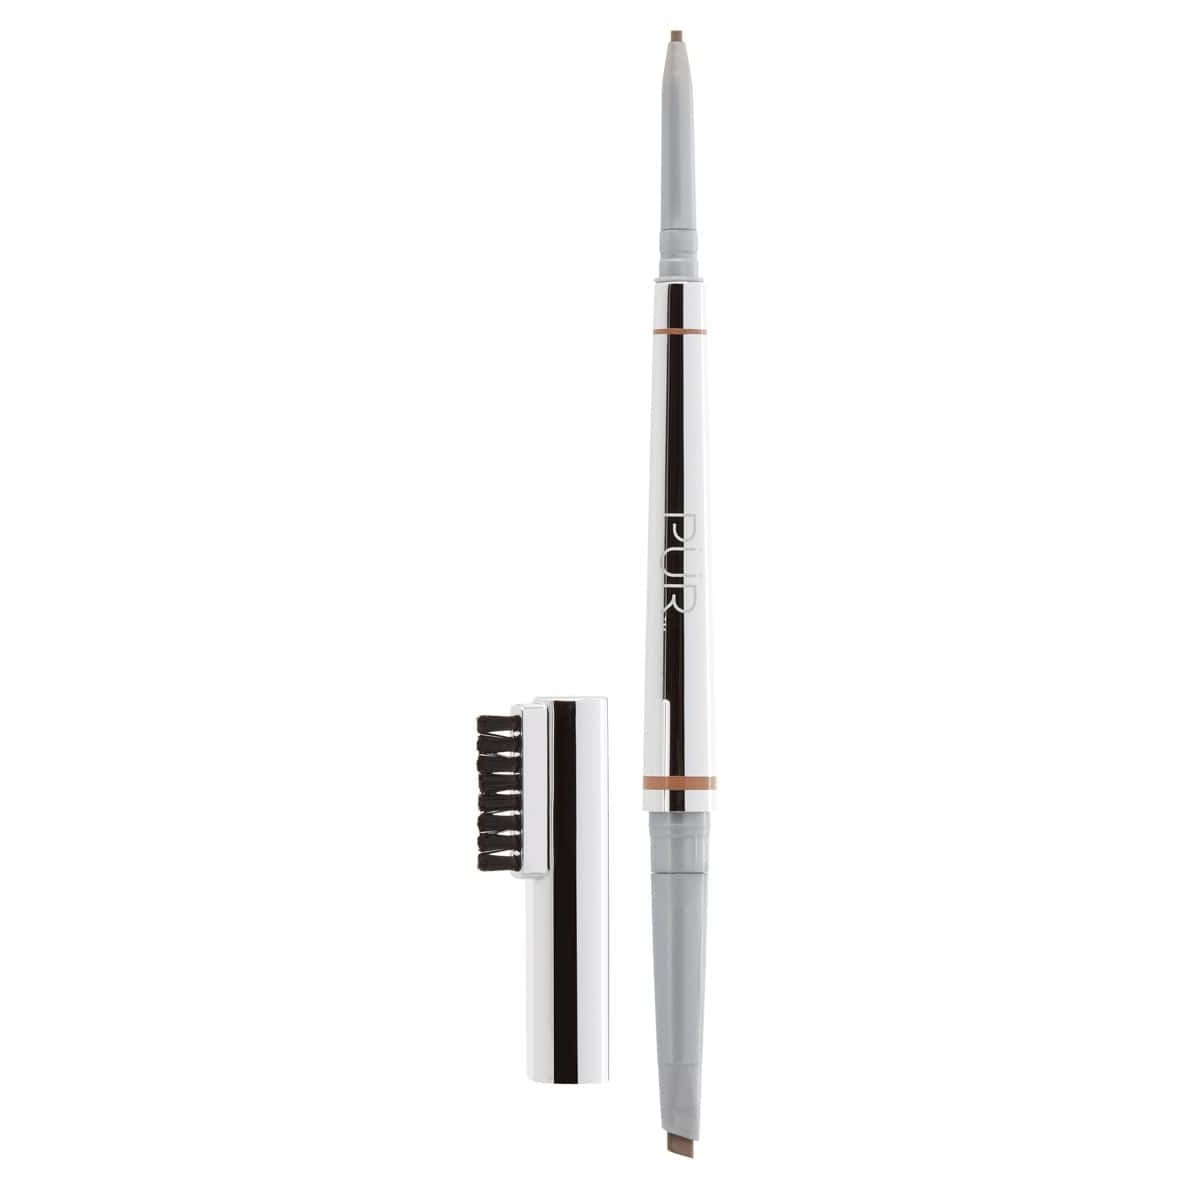 PÜR Cosmetics Arch Nemesis 4-in-1 Dual Ended Brow Pencil Light